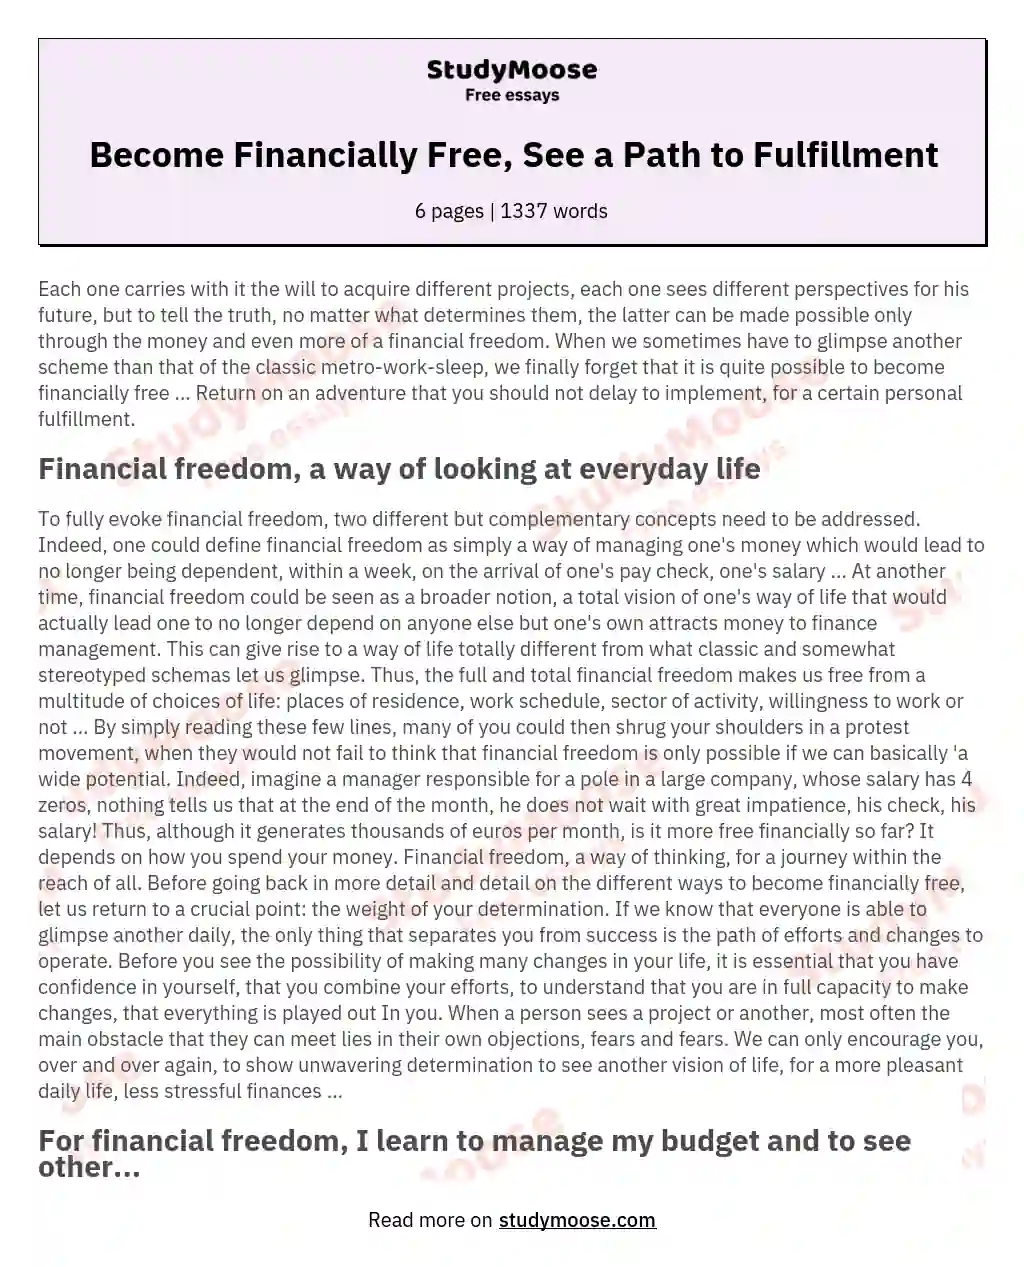 Become Financially Free, See a Path to Fulfillment